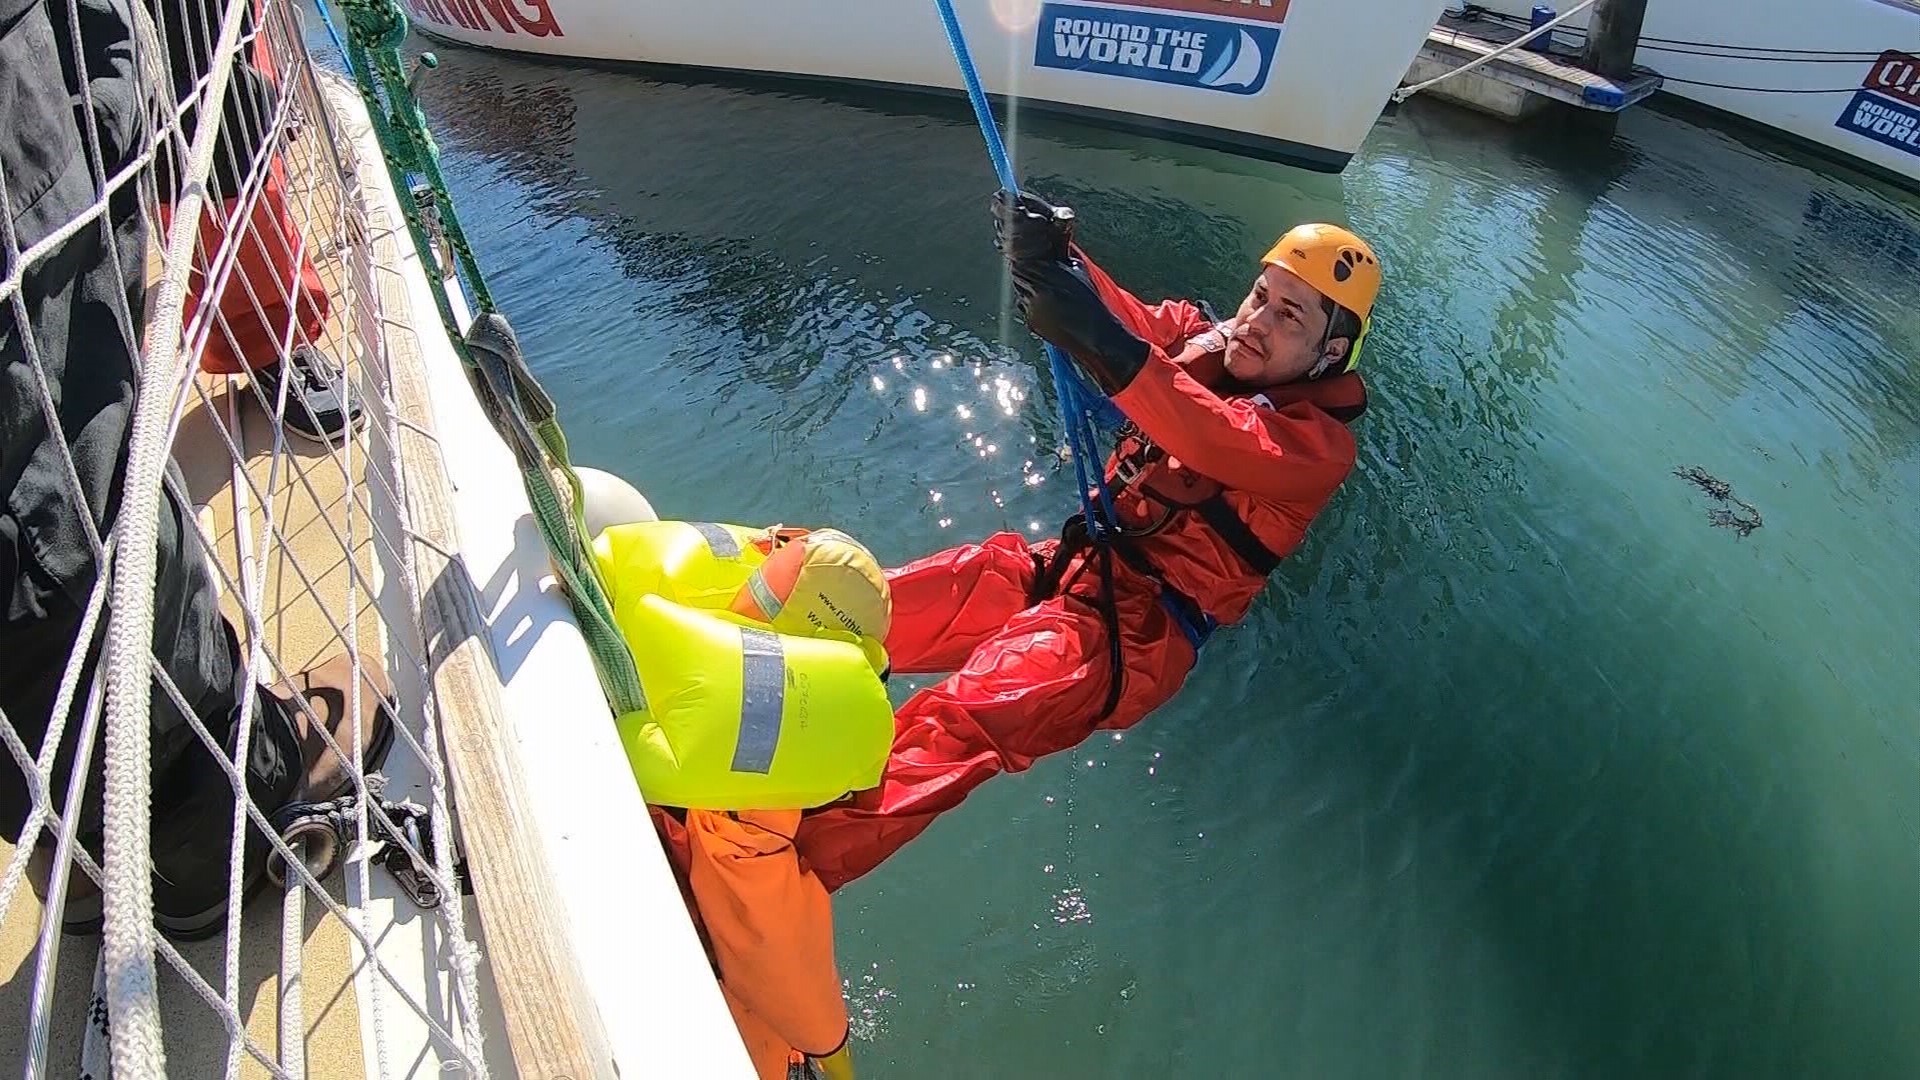 Evening's Jose Cedeno learns the ropes of taking on one of the biggest challenges of the 7 seas.